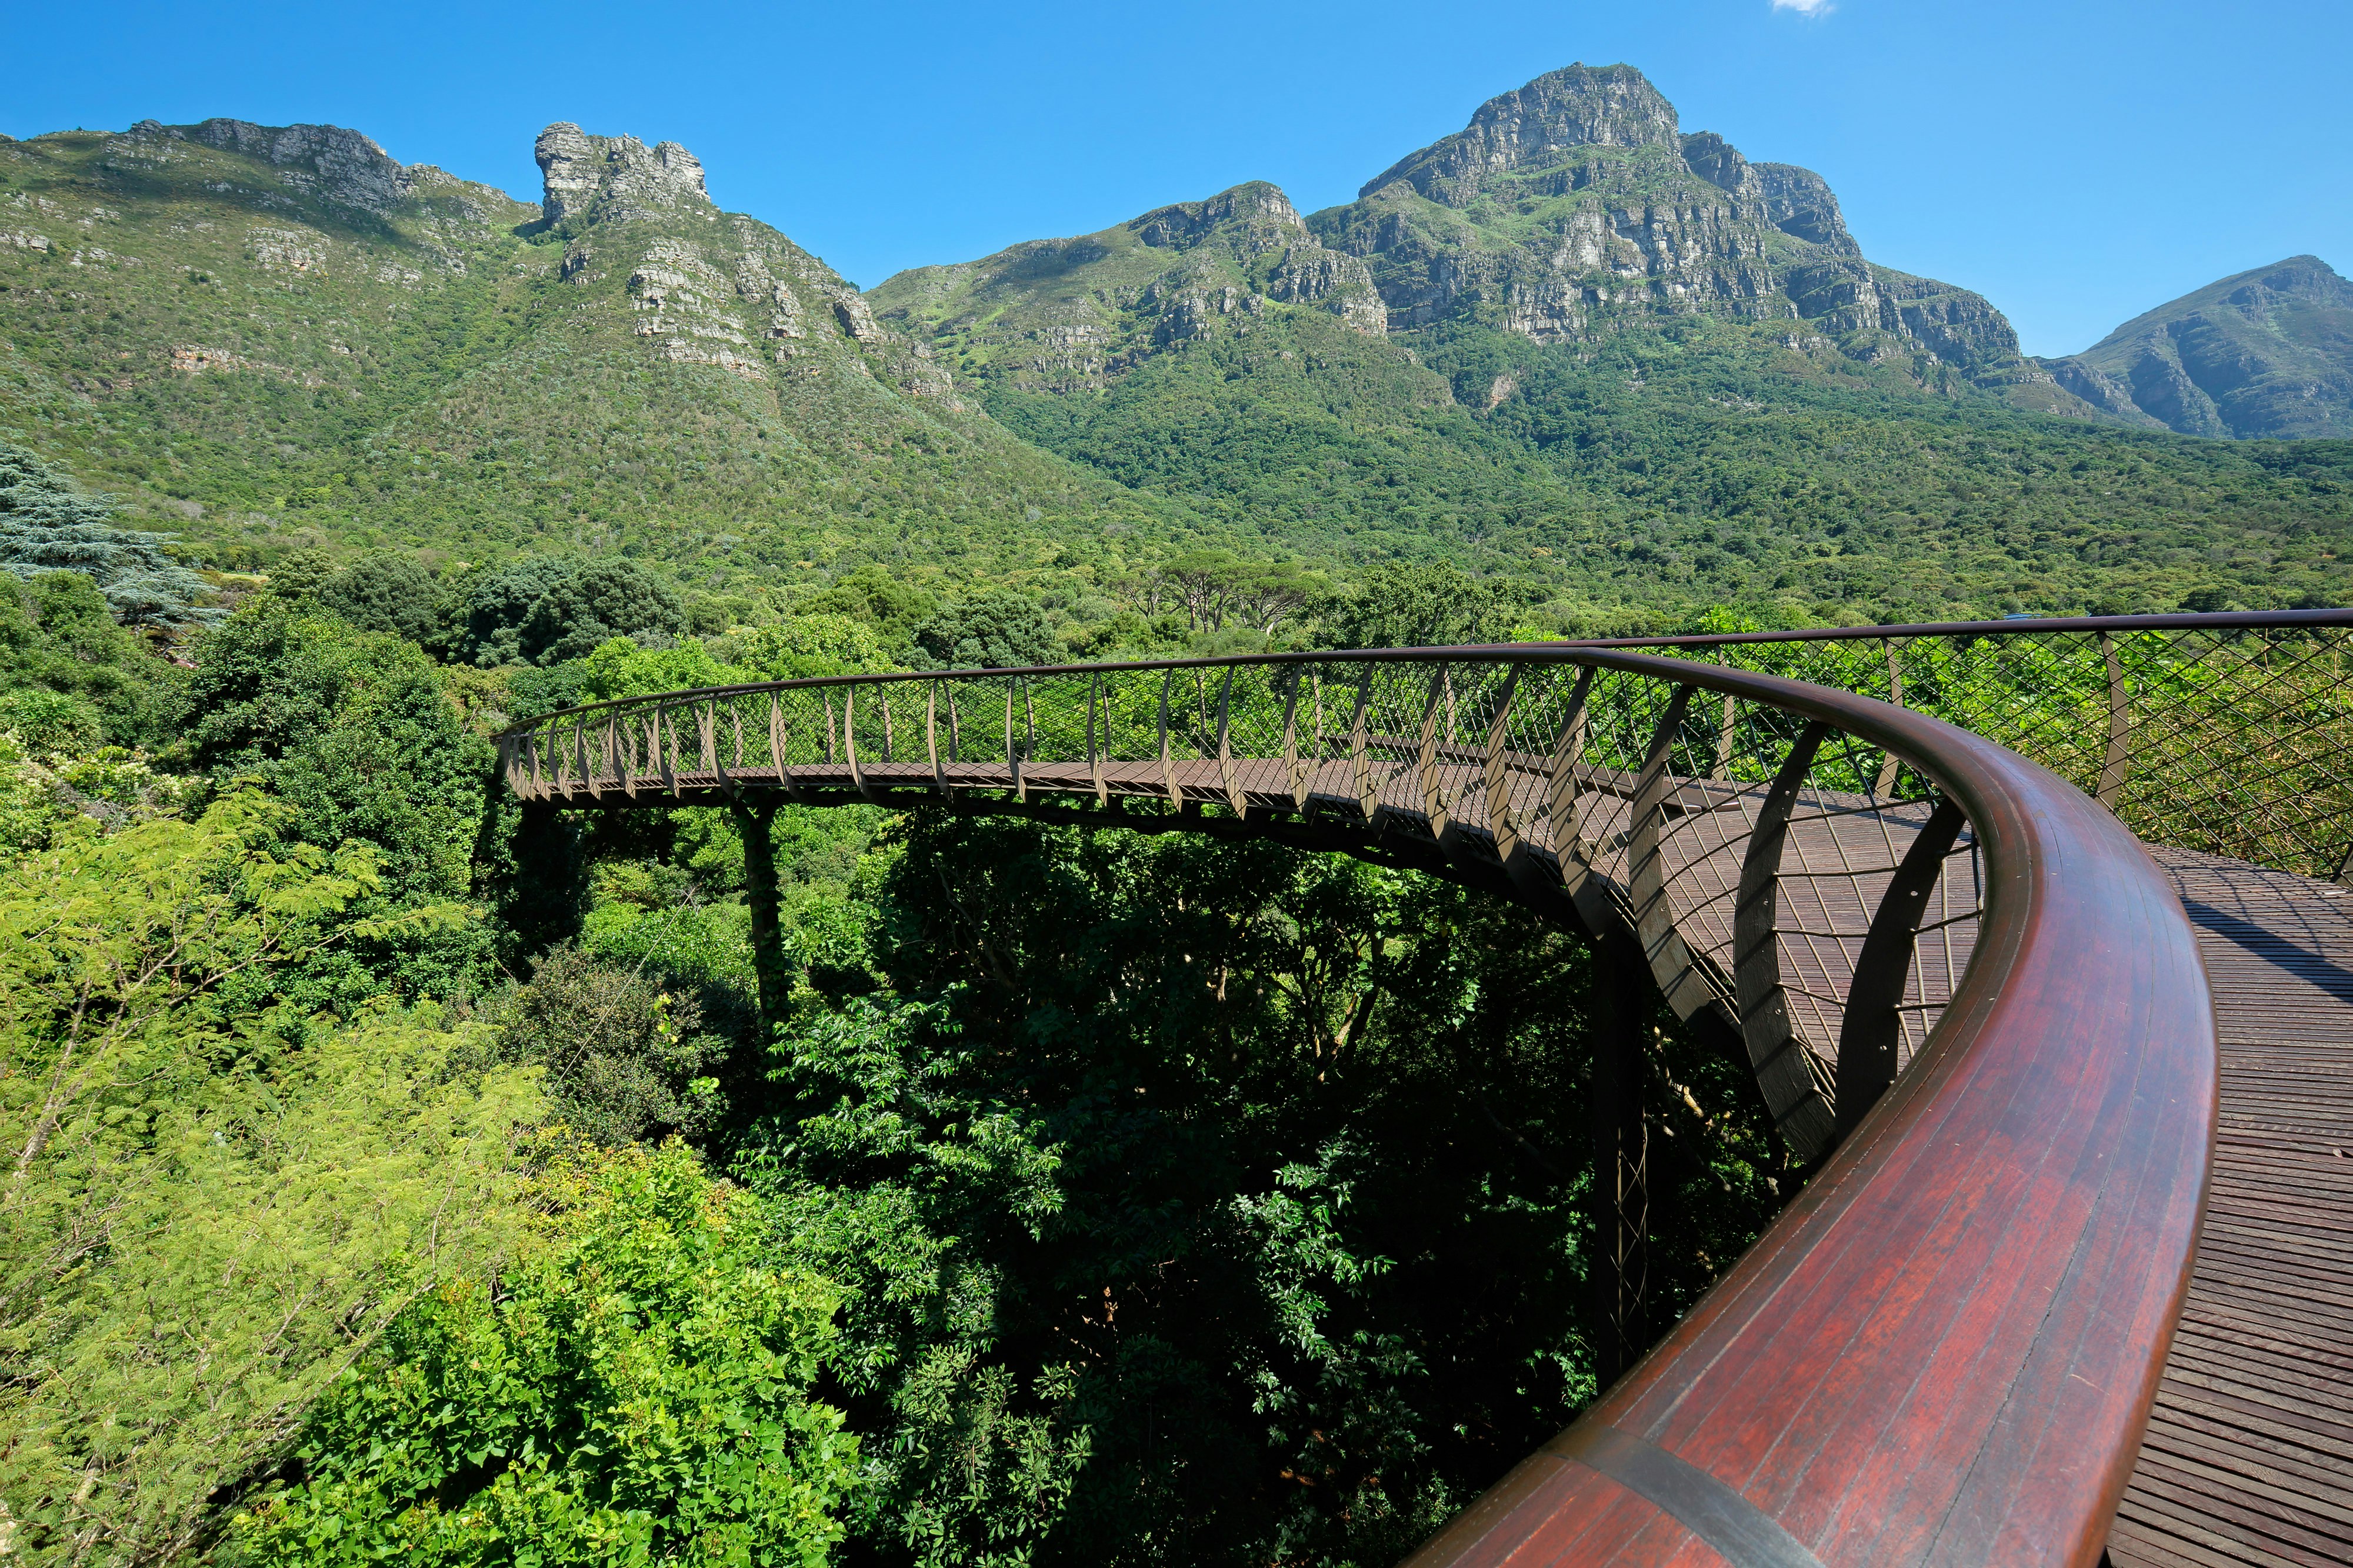 A curving wooden walkway sweeps through the landscape above the botanical garden; Table Mountain makes a stunning backdrop.